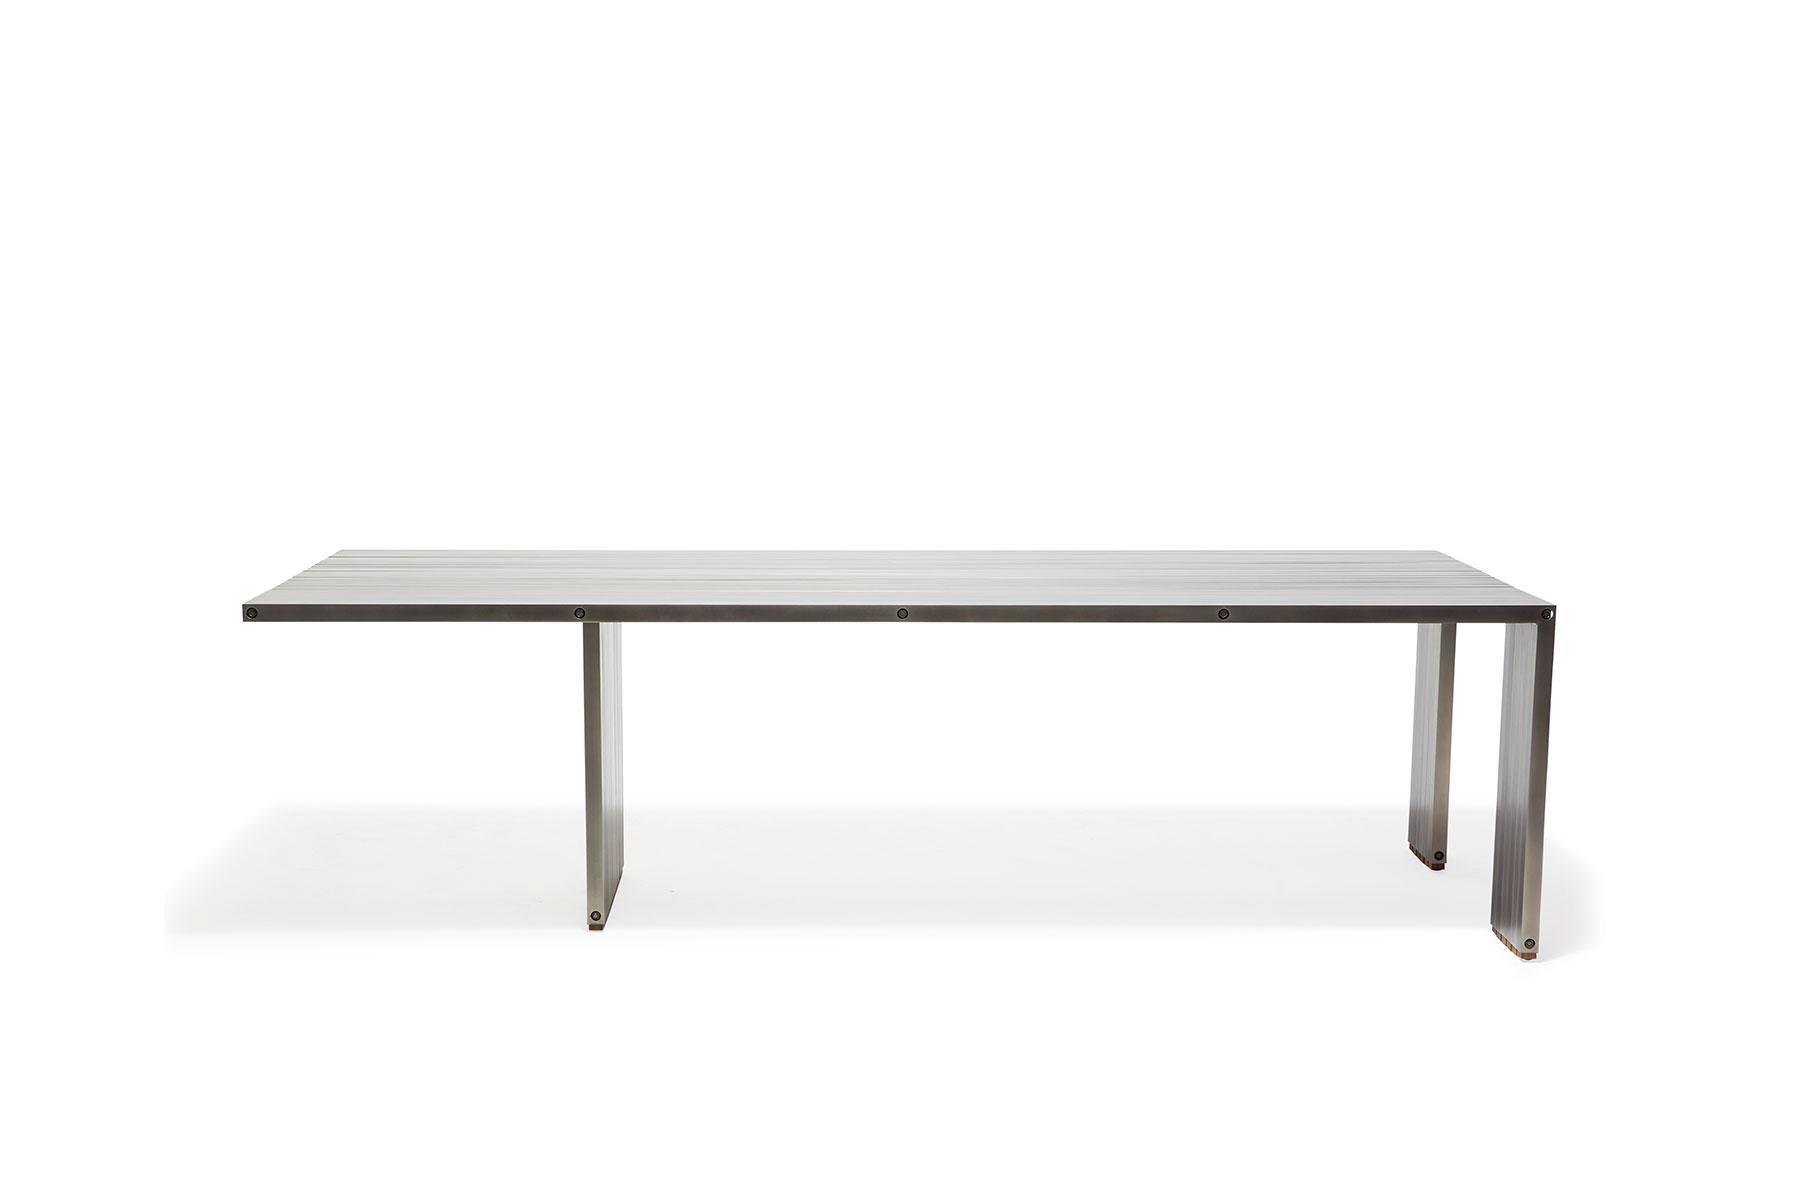 American Aluminum Compression Table in Antique Nickel For Sale